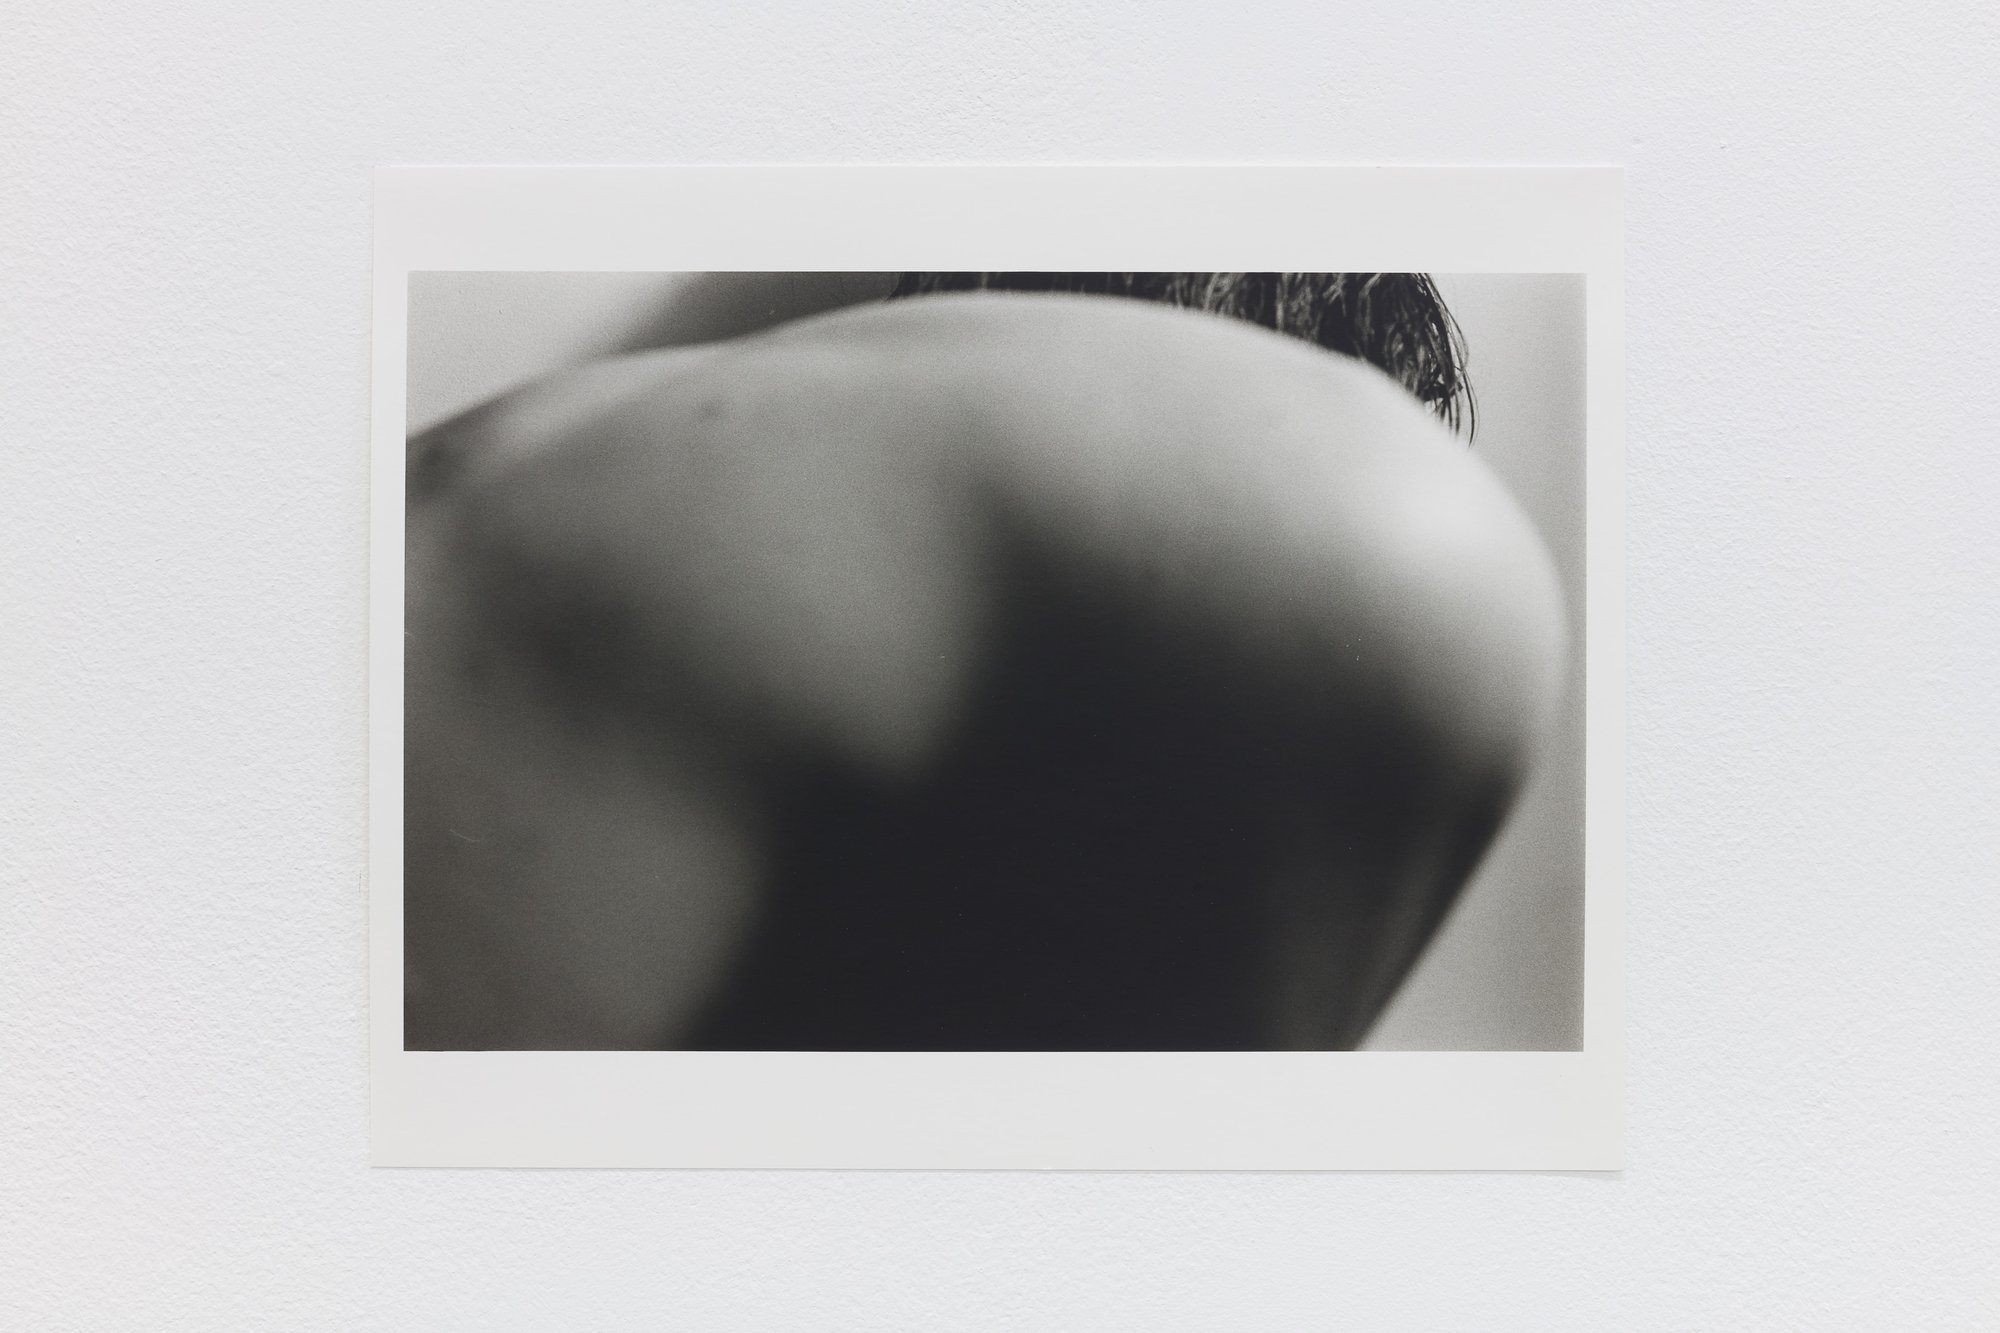 Ian Law, Untitled, fibre based bromide print, 25.4 x 20.3 cm (10 x 8 in), 2020